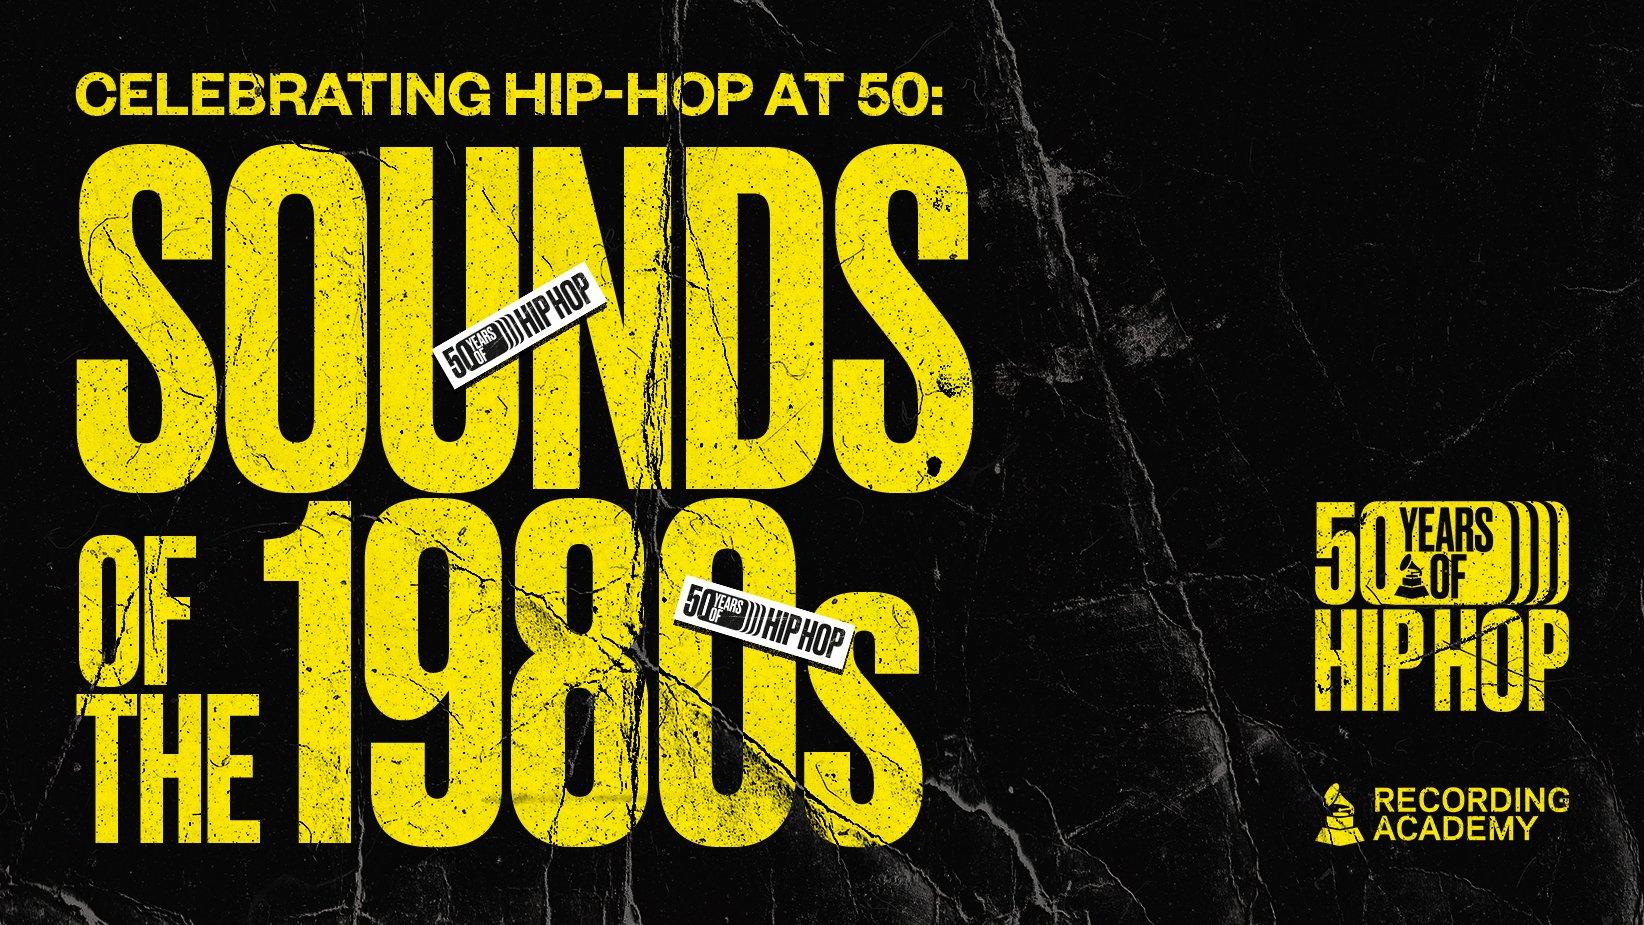 Essential Hip-Hop Releases From The 1980s album covers